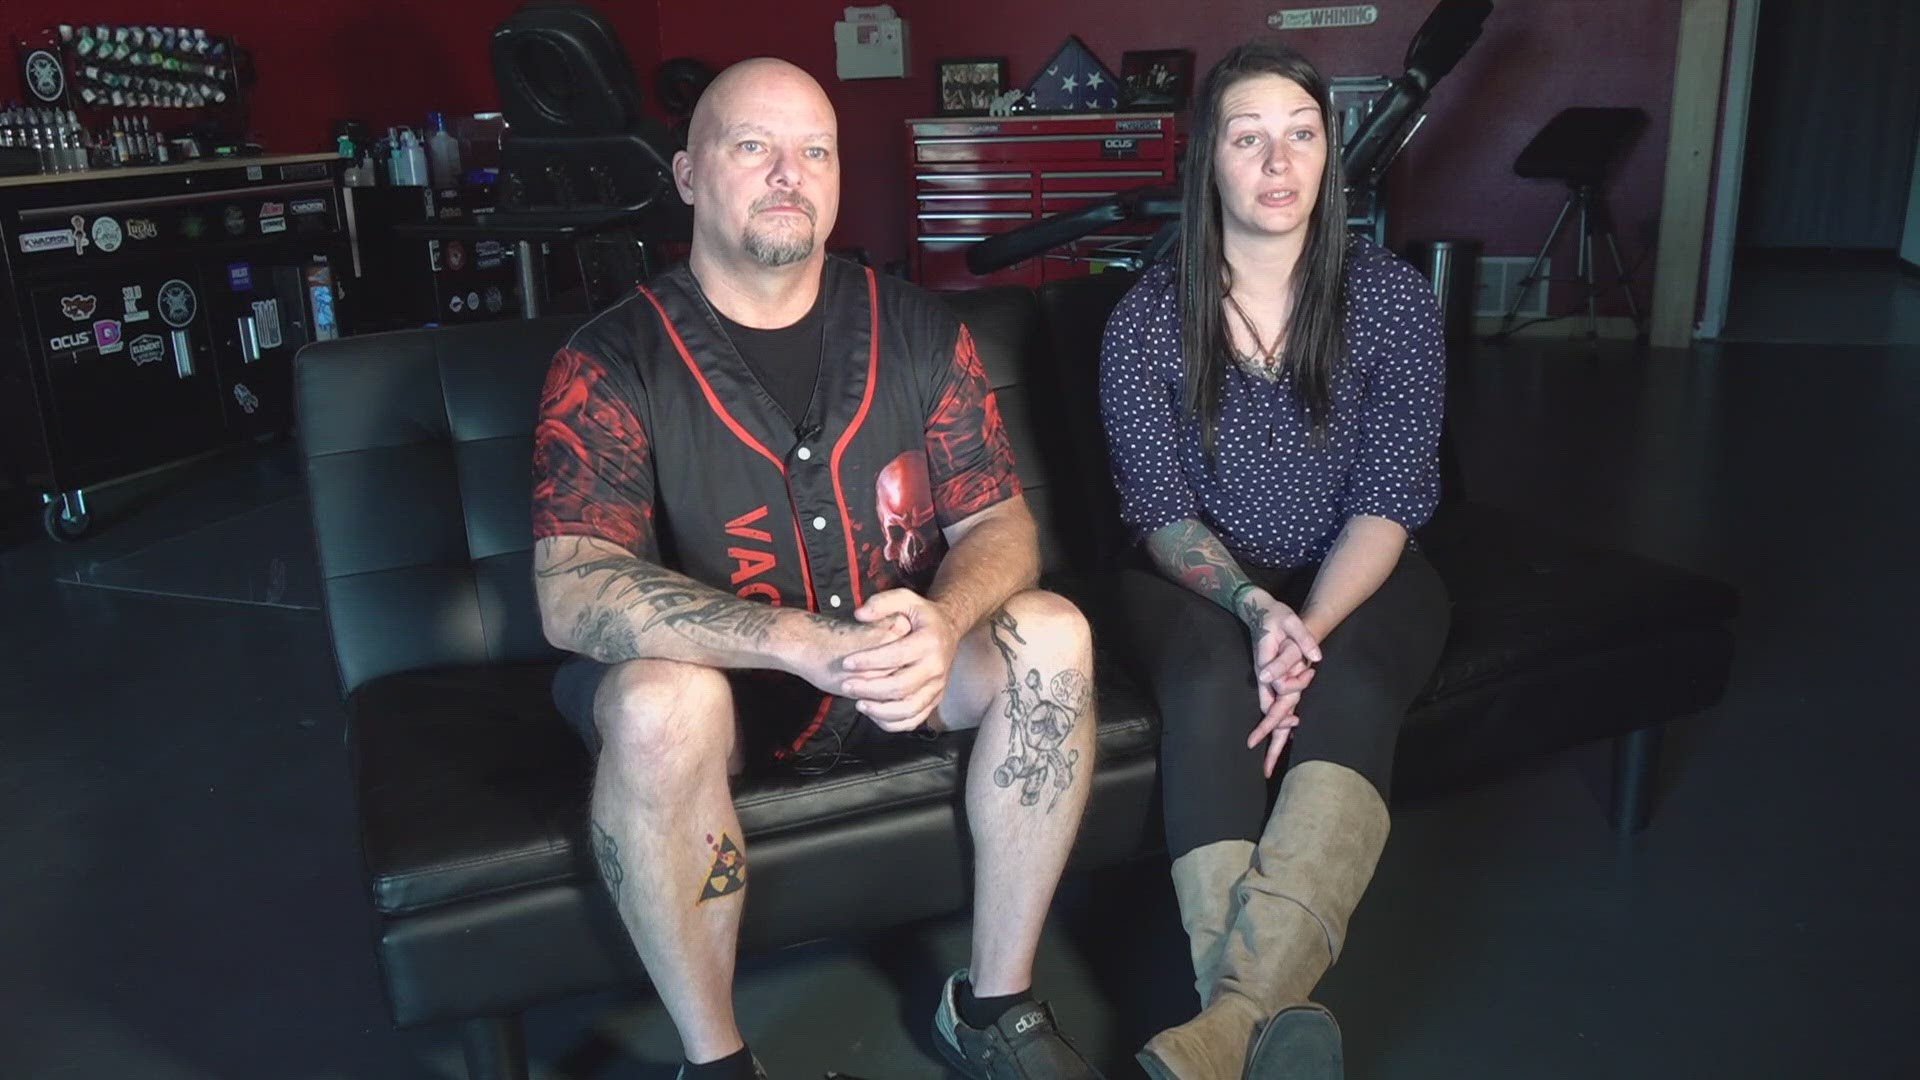 The Family Business - Tattoo Parlor